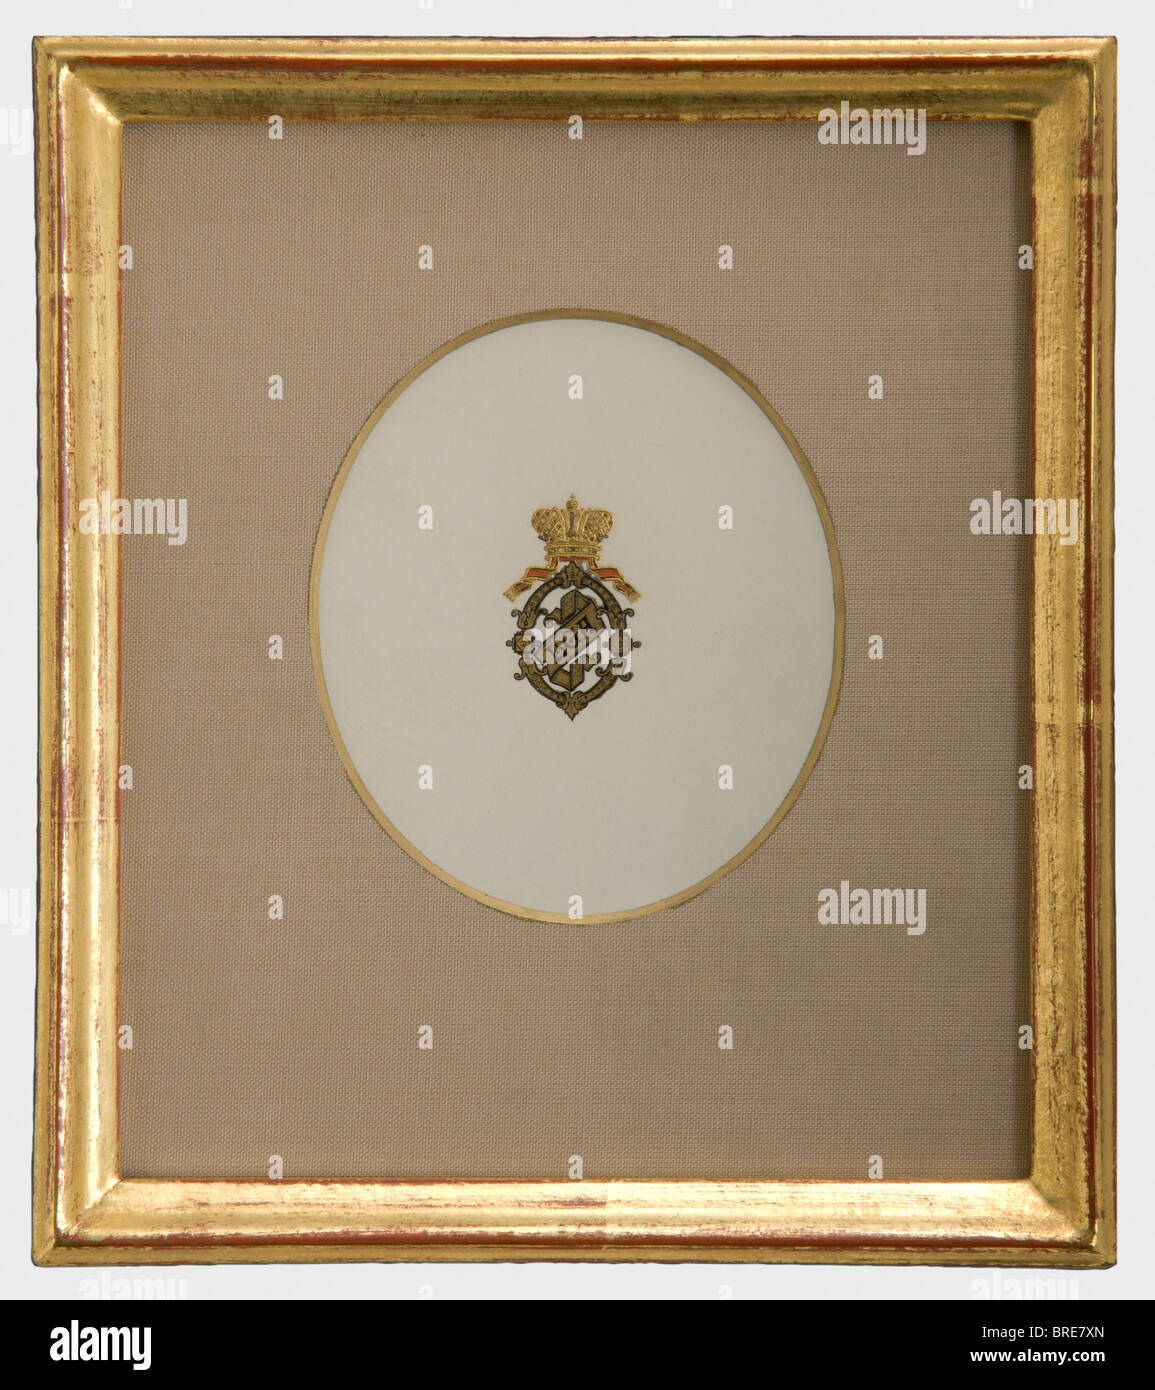 A monogrammed card, circa 1880 'Olga' in colour under a golden Grand Ducal crown stamped on paper. Recently framed, under glass and passepartout. Framed dimensions 19 x 16.7 cm. Provenance: Grand Duchess Olga Nikolaevna Romanova (1822 - 1892). historic, historical, 19th century, fine arts, art, art object, art objects, artful, precious, collectible, collector's item, collectibles, collector's items, rarity, rarities, Stock Photo